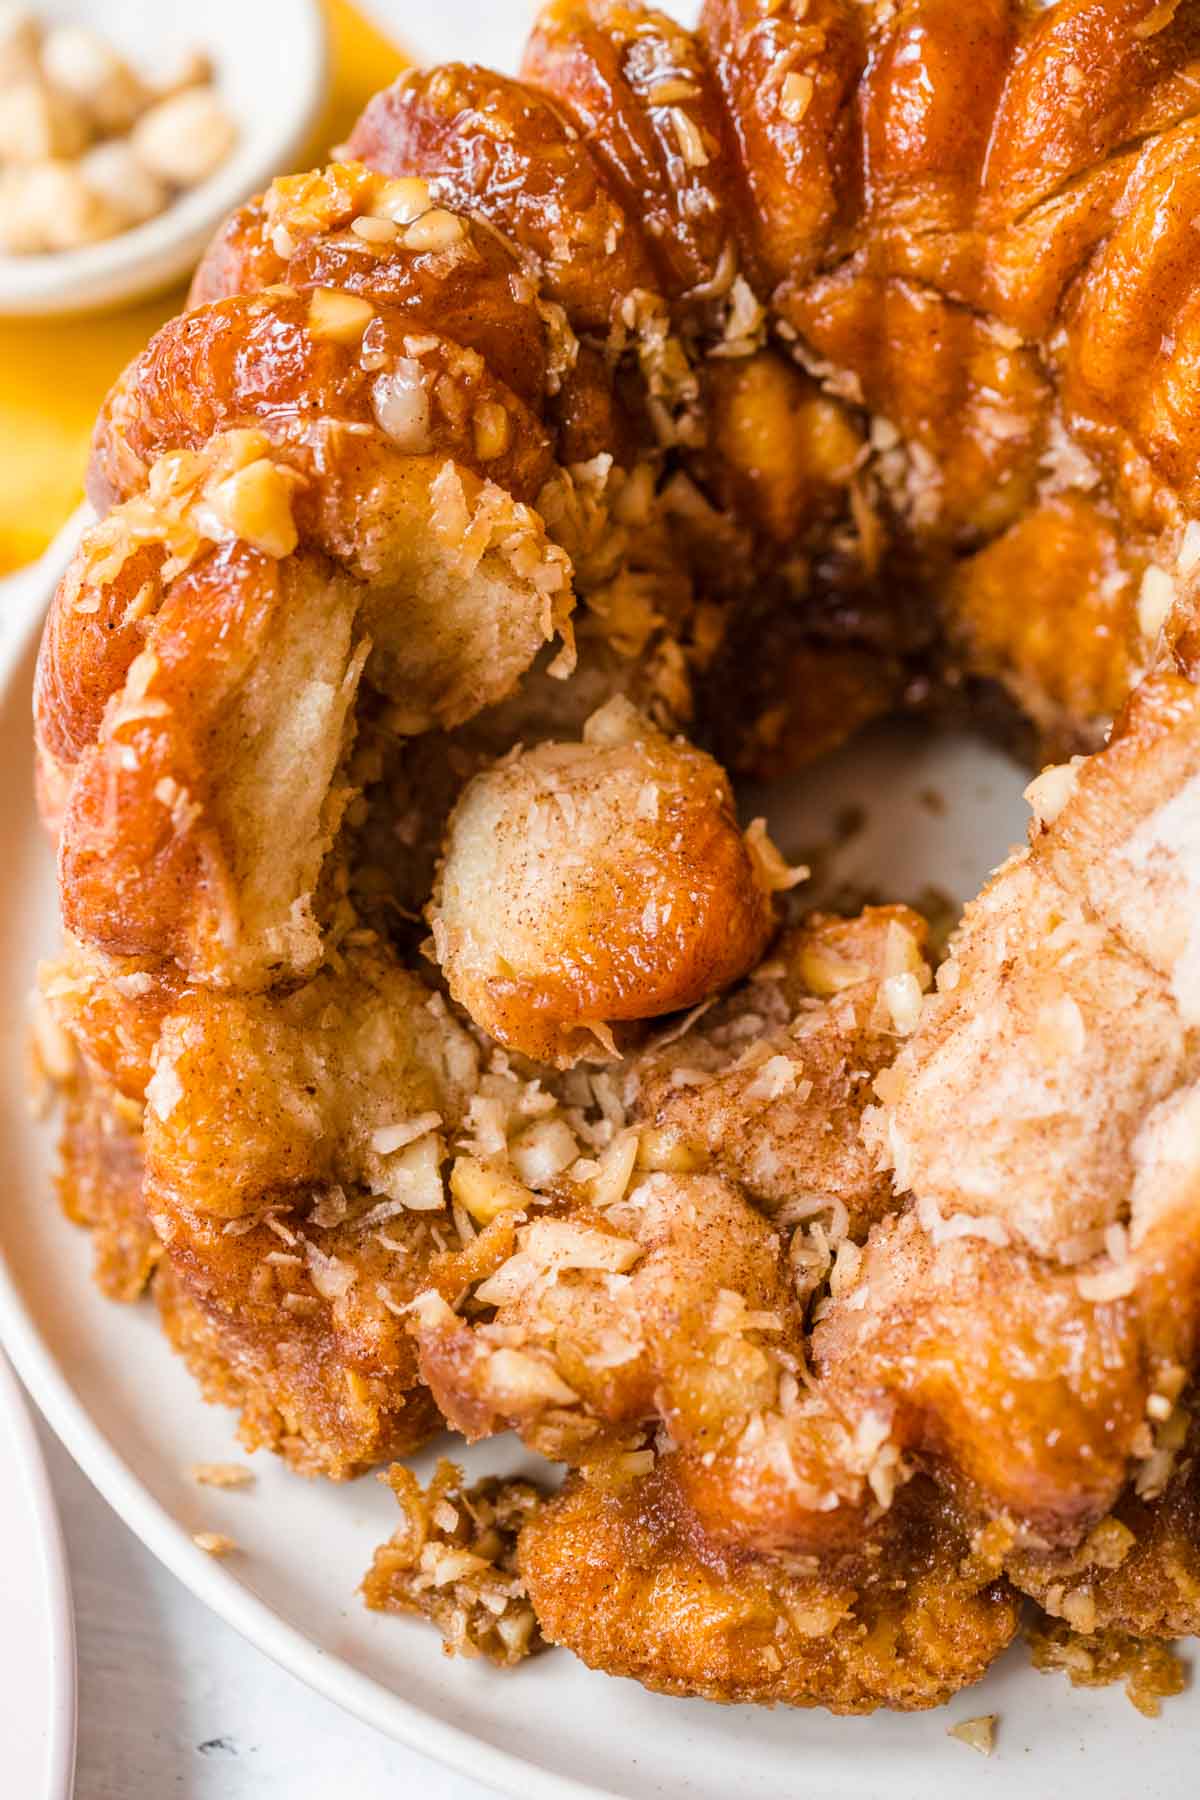 Hawaiian Monkey Bread finished on plate with pieces missing, top down view close up